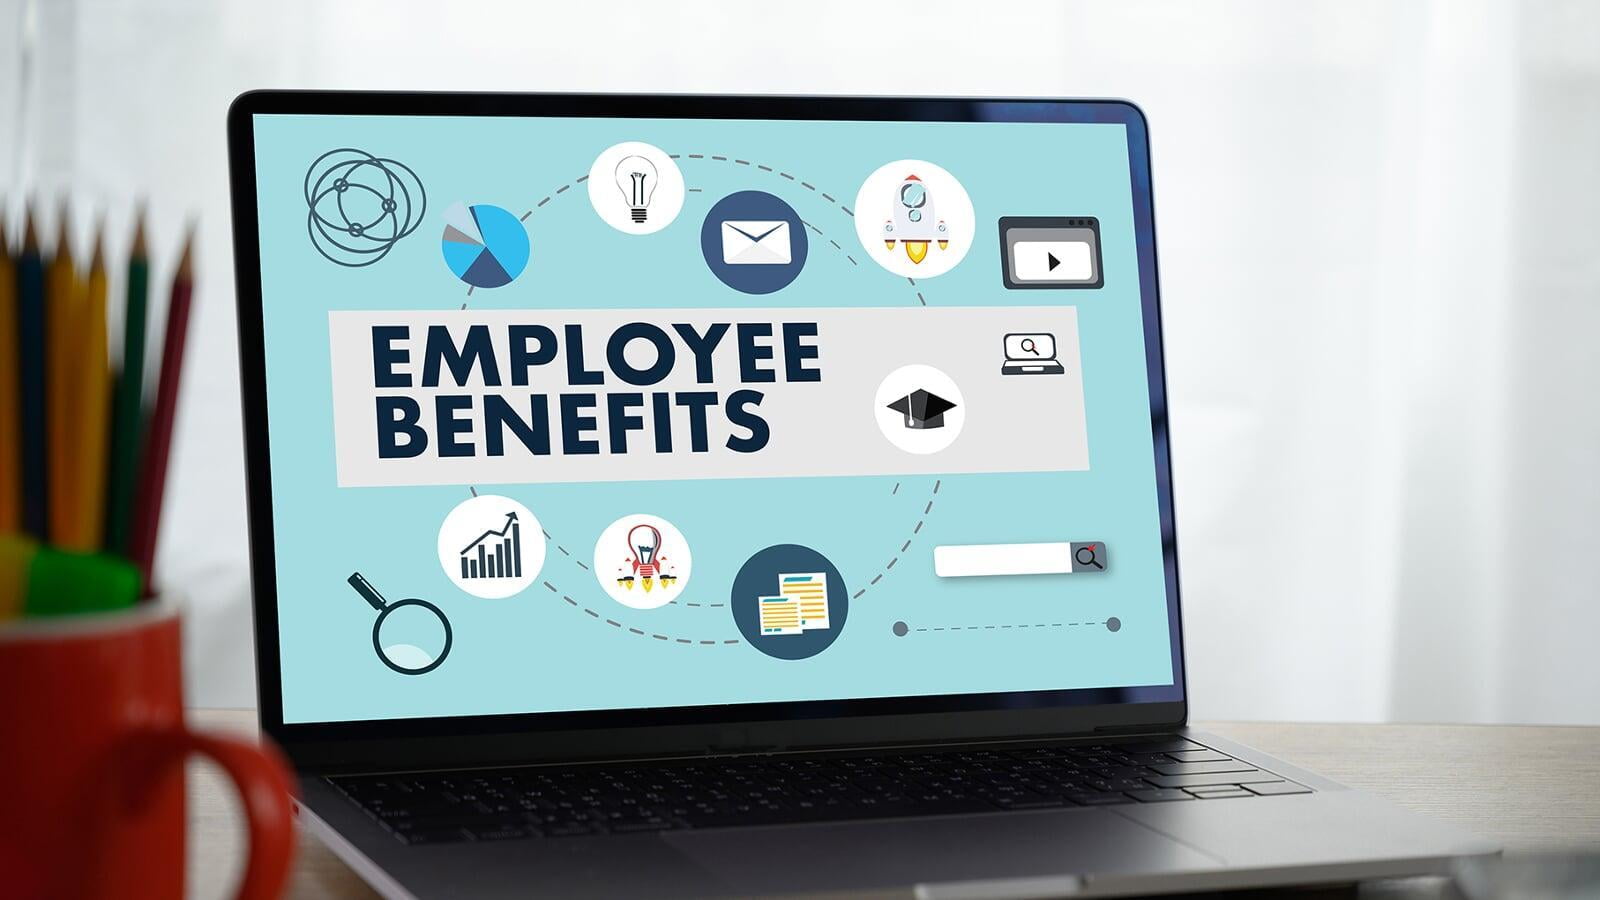 6 Questions to Ask Yourself About Your Employee Benefits Experience